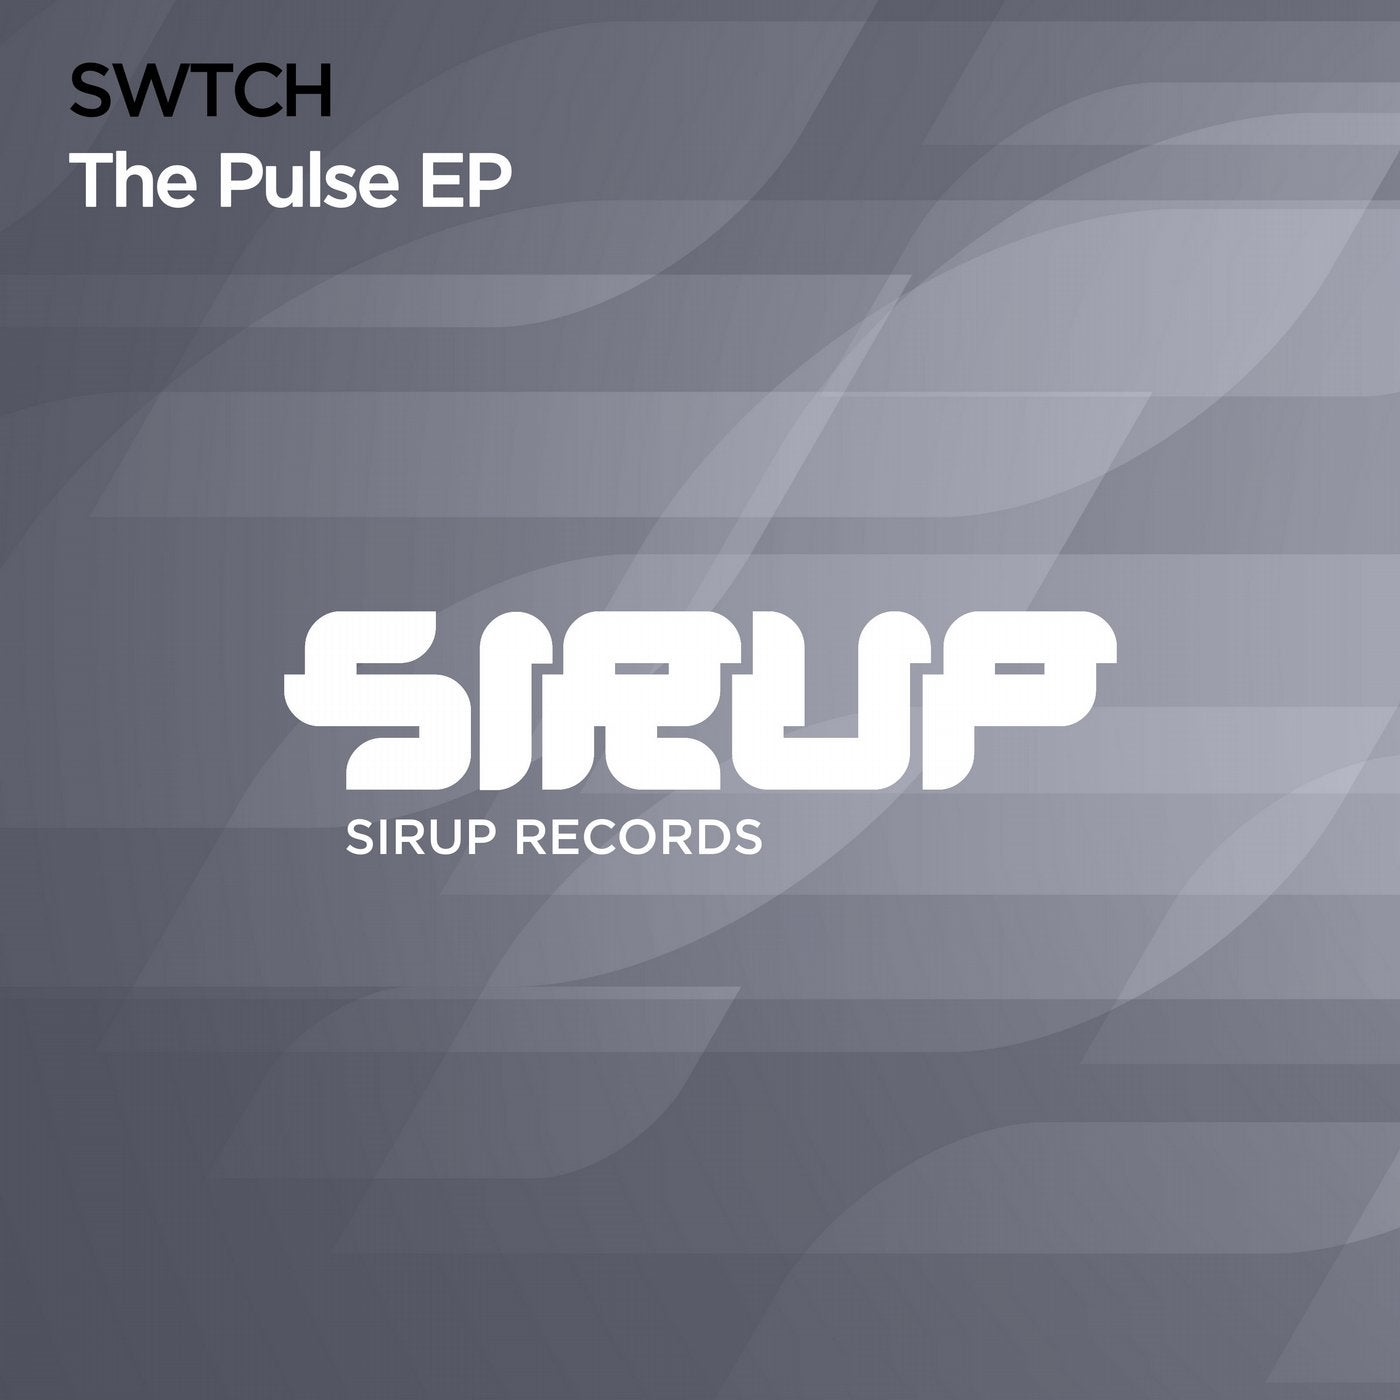 The Pulse EP